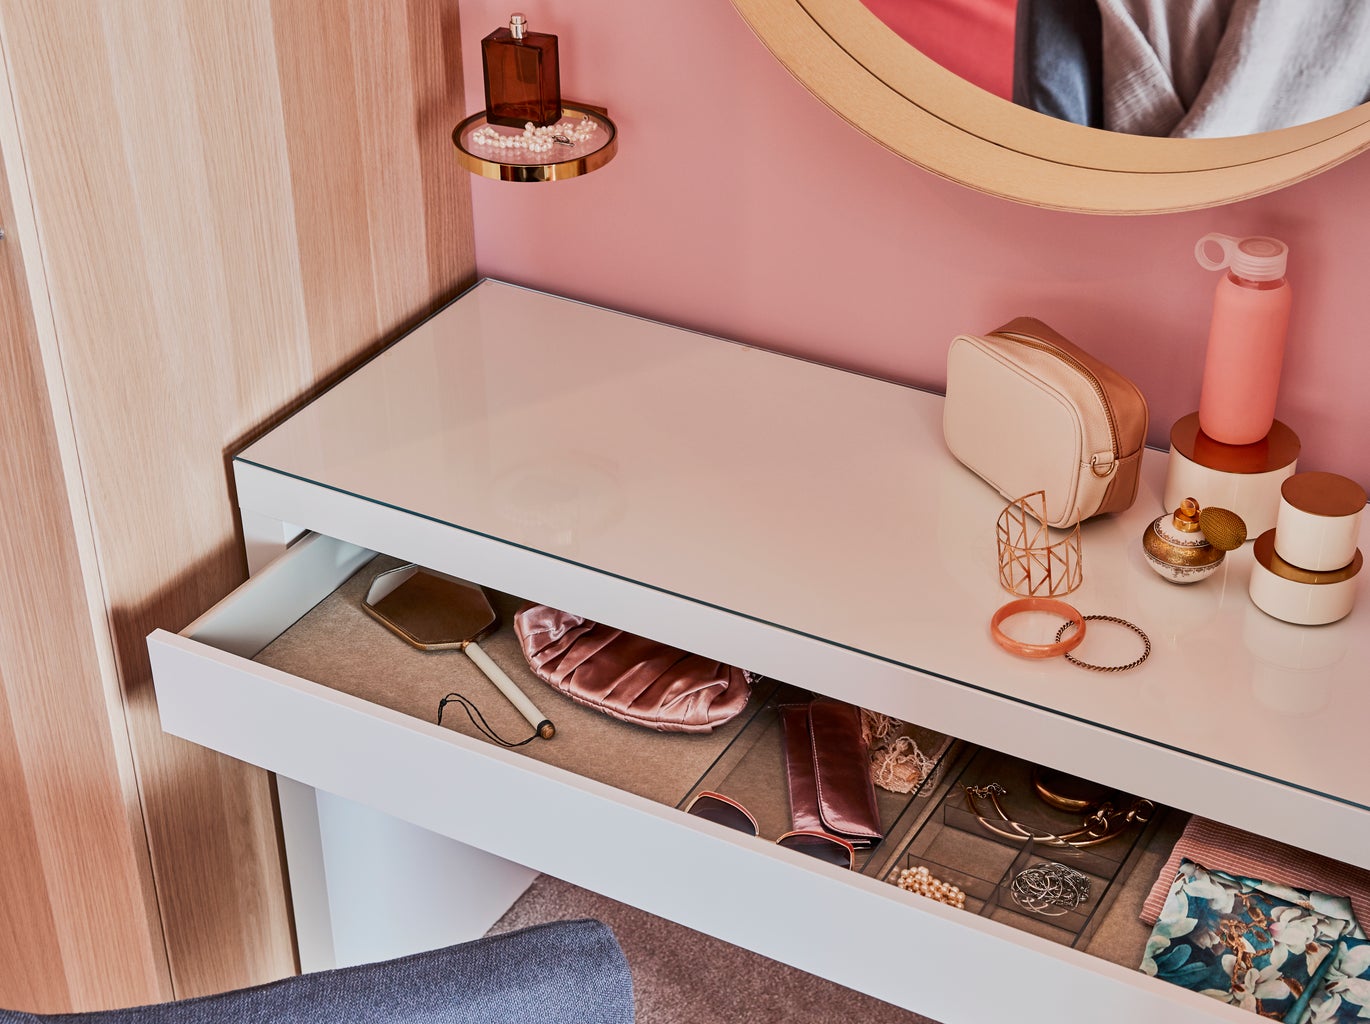 IKEA Minimalist Dressing Table?width=1024&height=1024&fit=cover&auto=webp